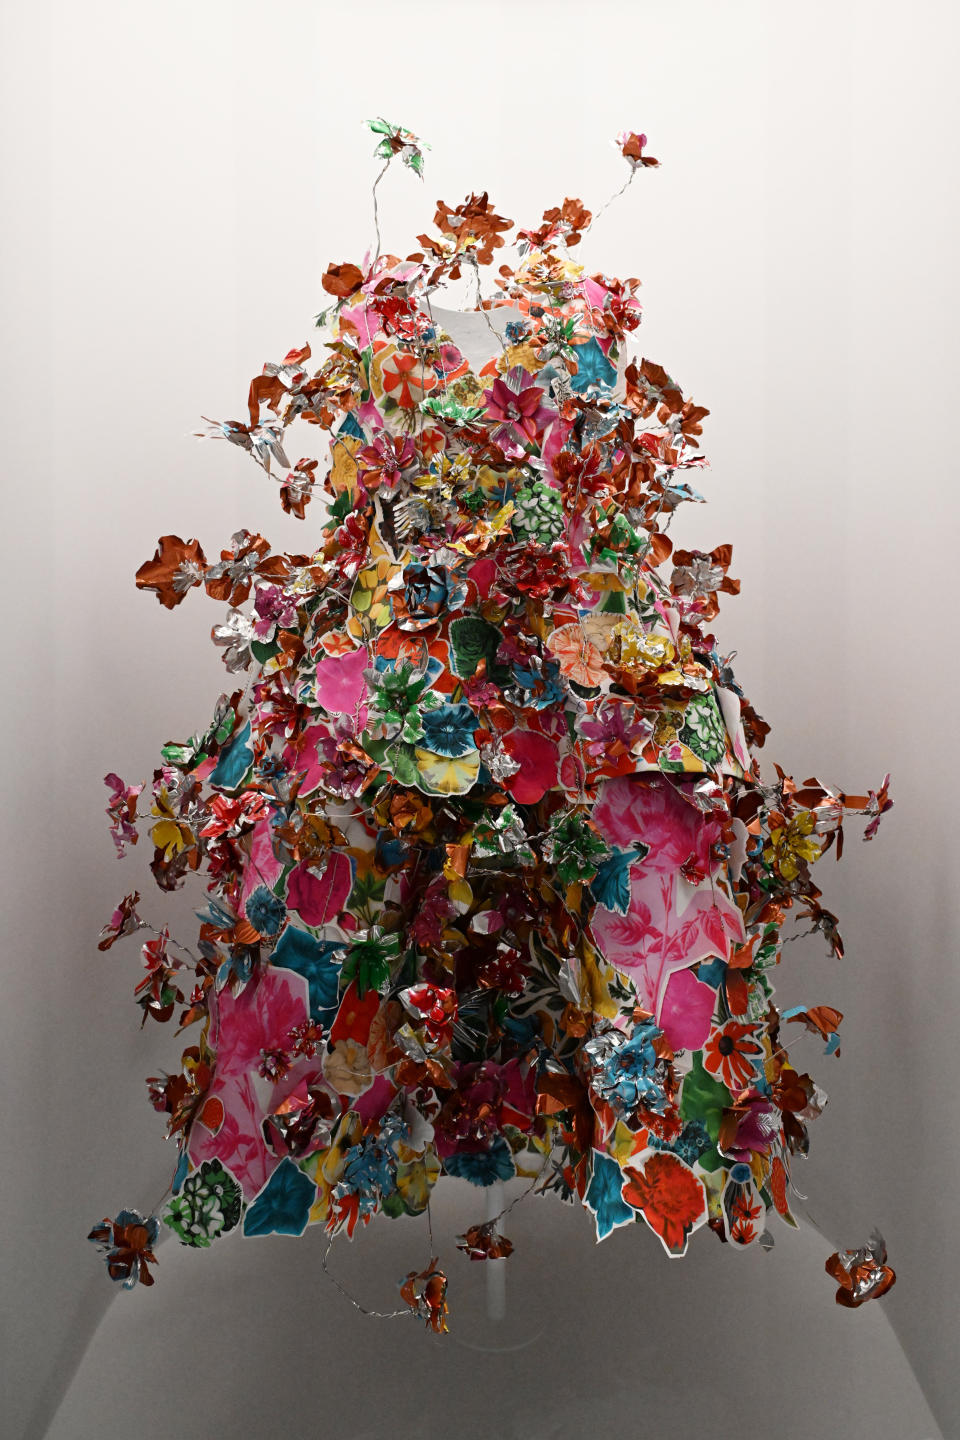 Sculpture of a human figure made from assorted floral fabric, creating a burst of flowers from the body